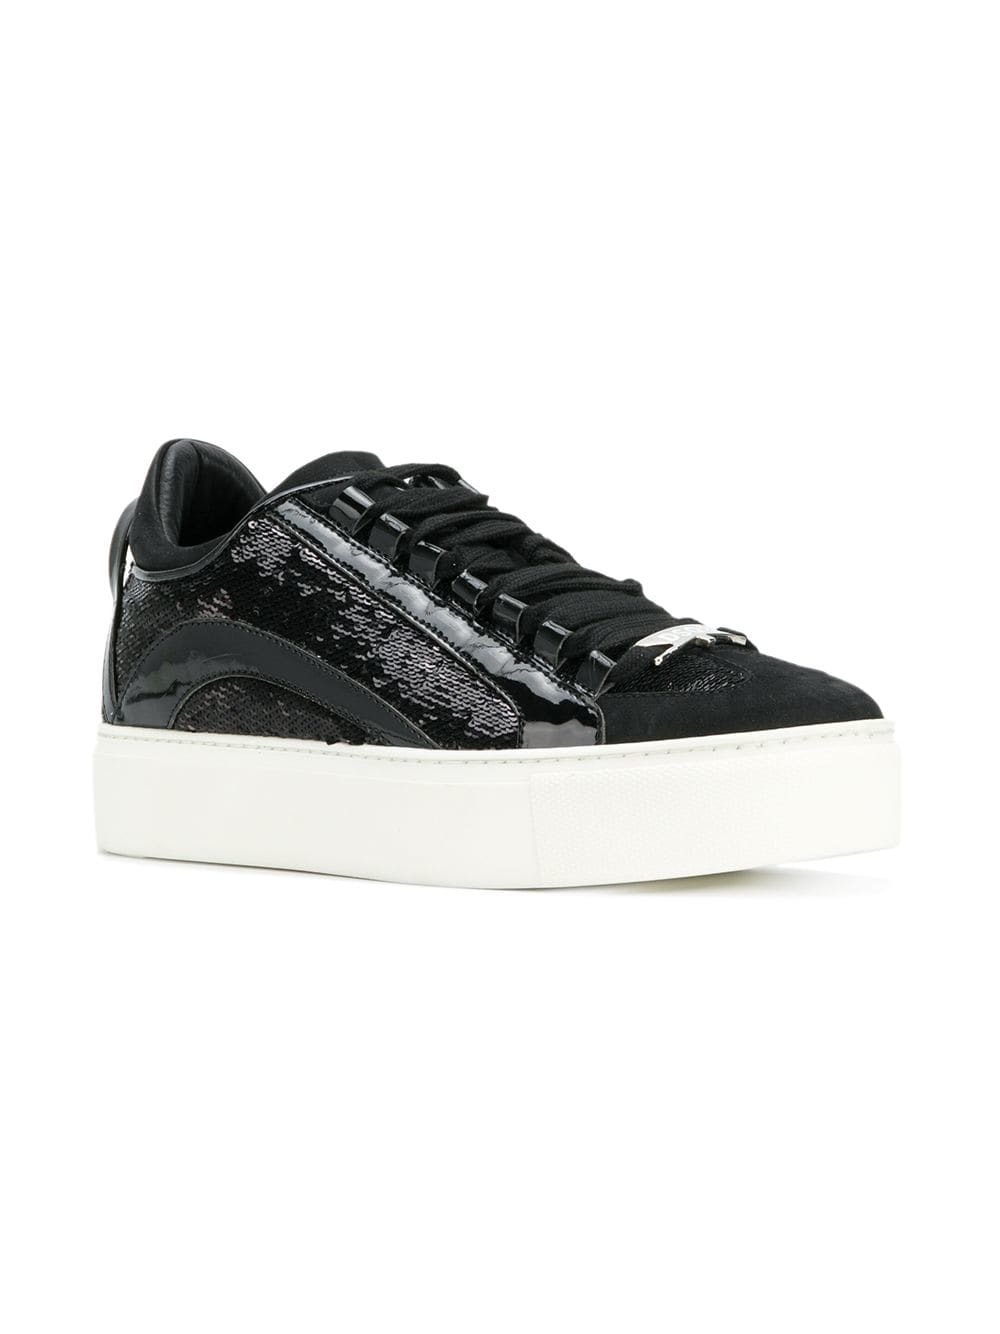 Dsquared2 Sequined Sneakers, $420 